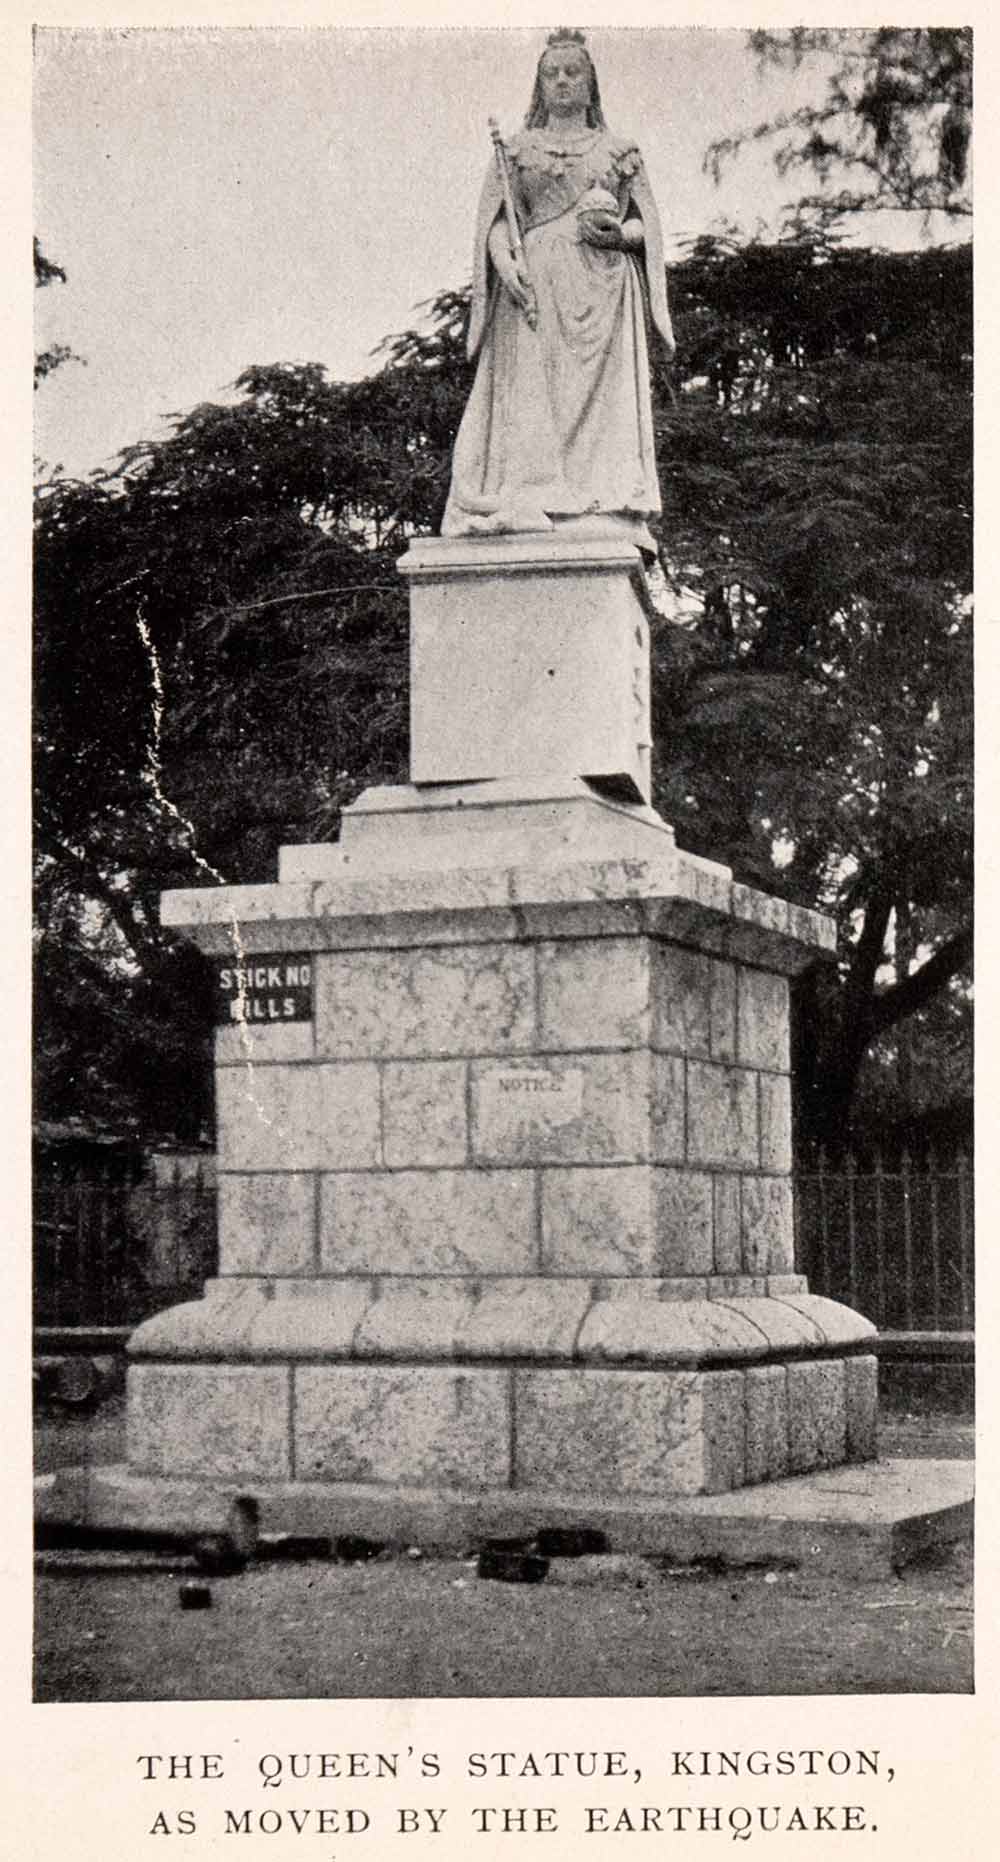 1925 Print Kingston Earthquake Queen Statue Displaced Aftermath Natural XGDA7